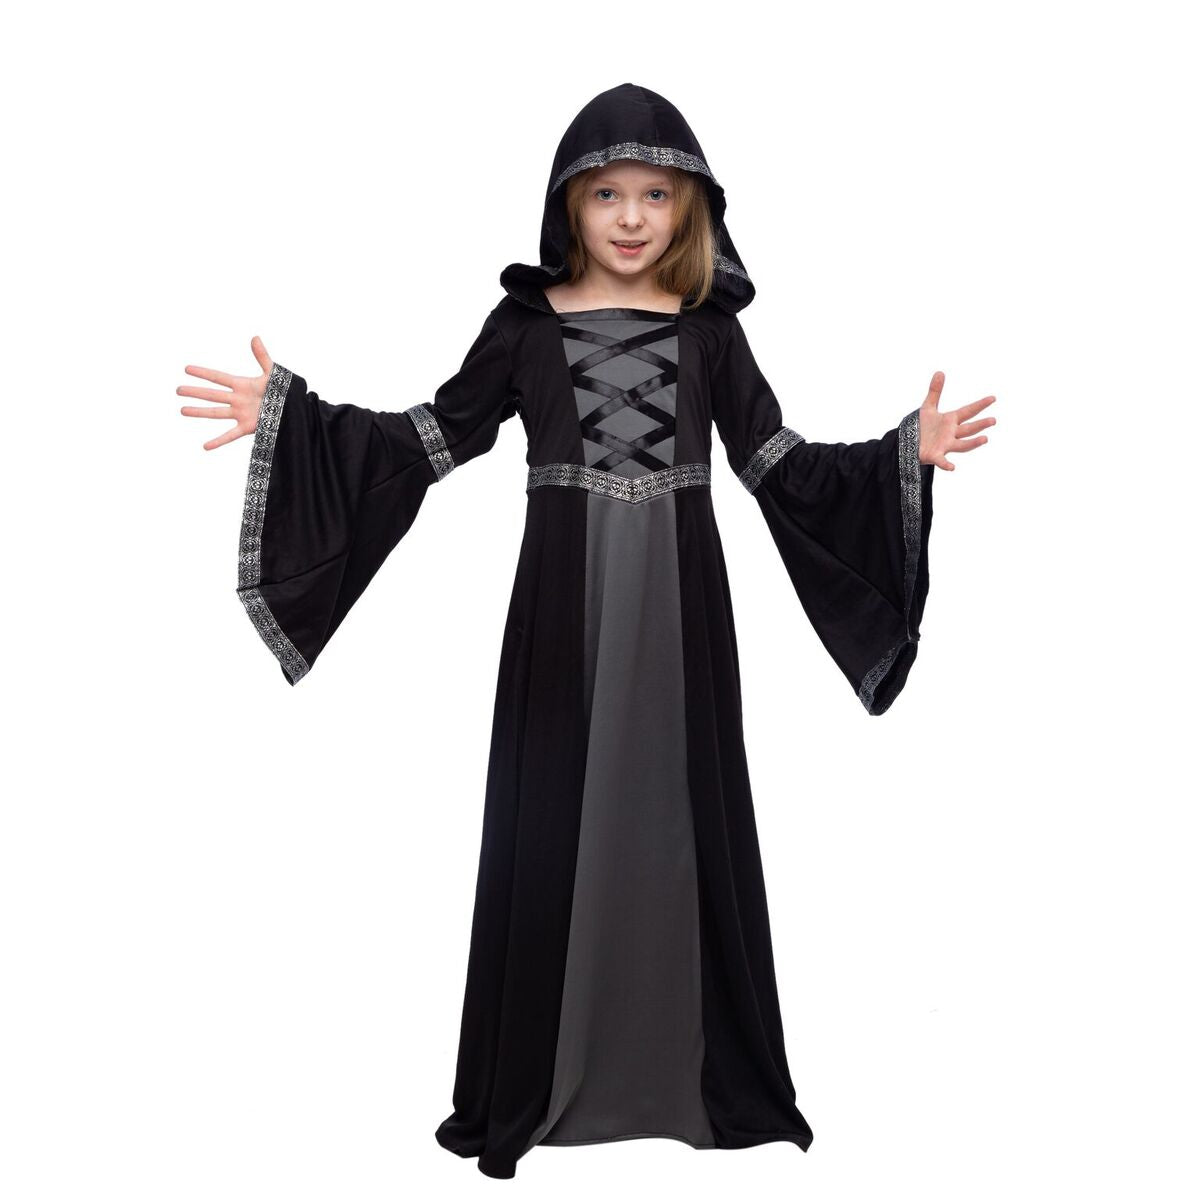 Hooded Robe Costume for Cosplay Fortune Teller, Gypsy, Princess Girls  Role-Playing Party